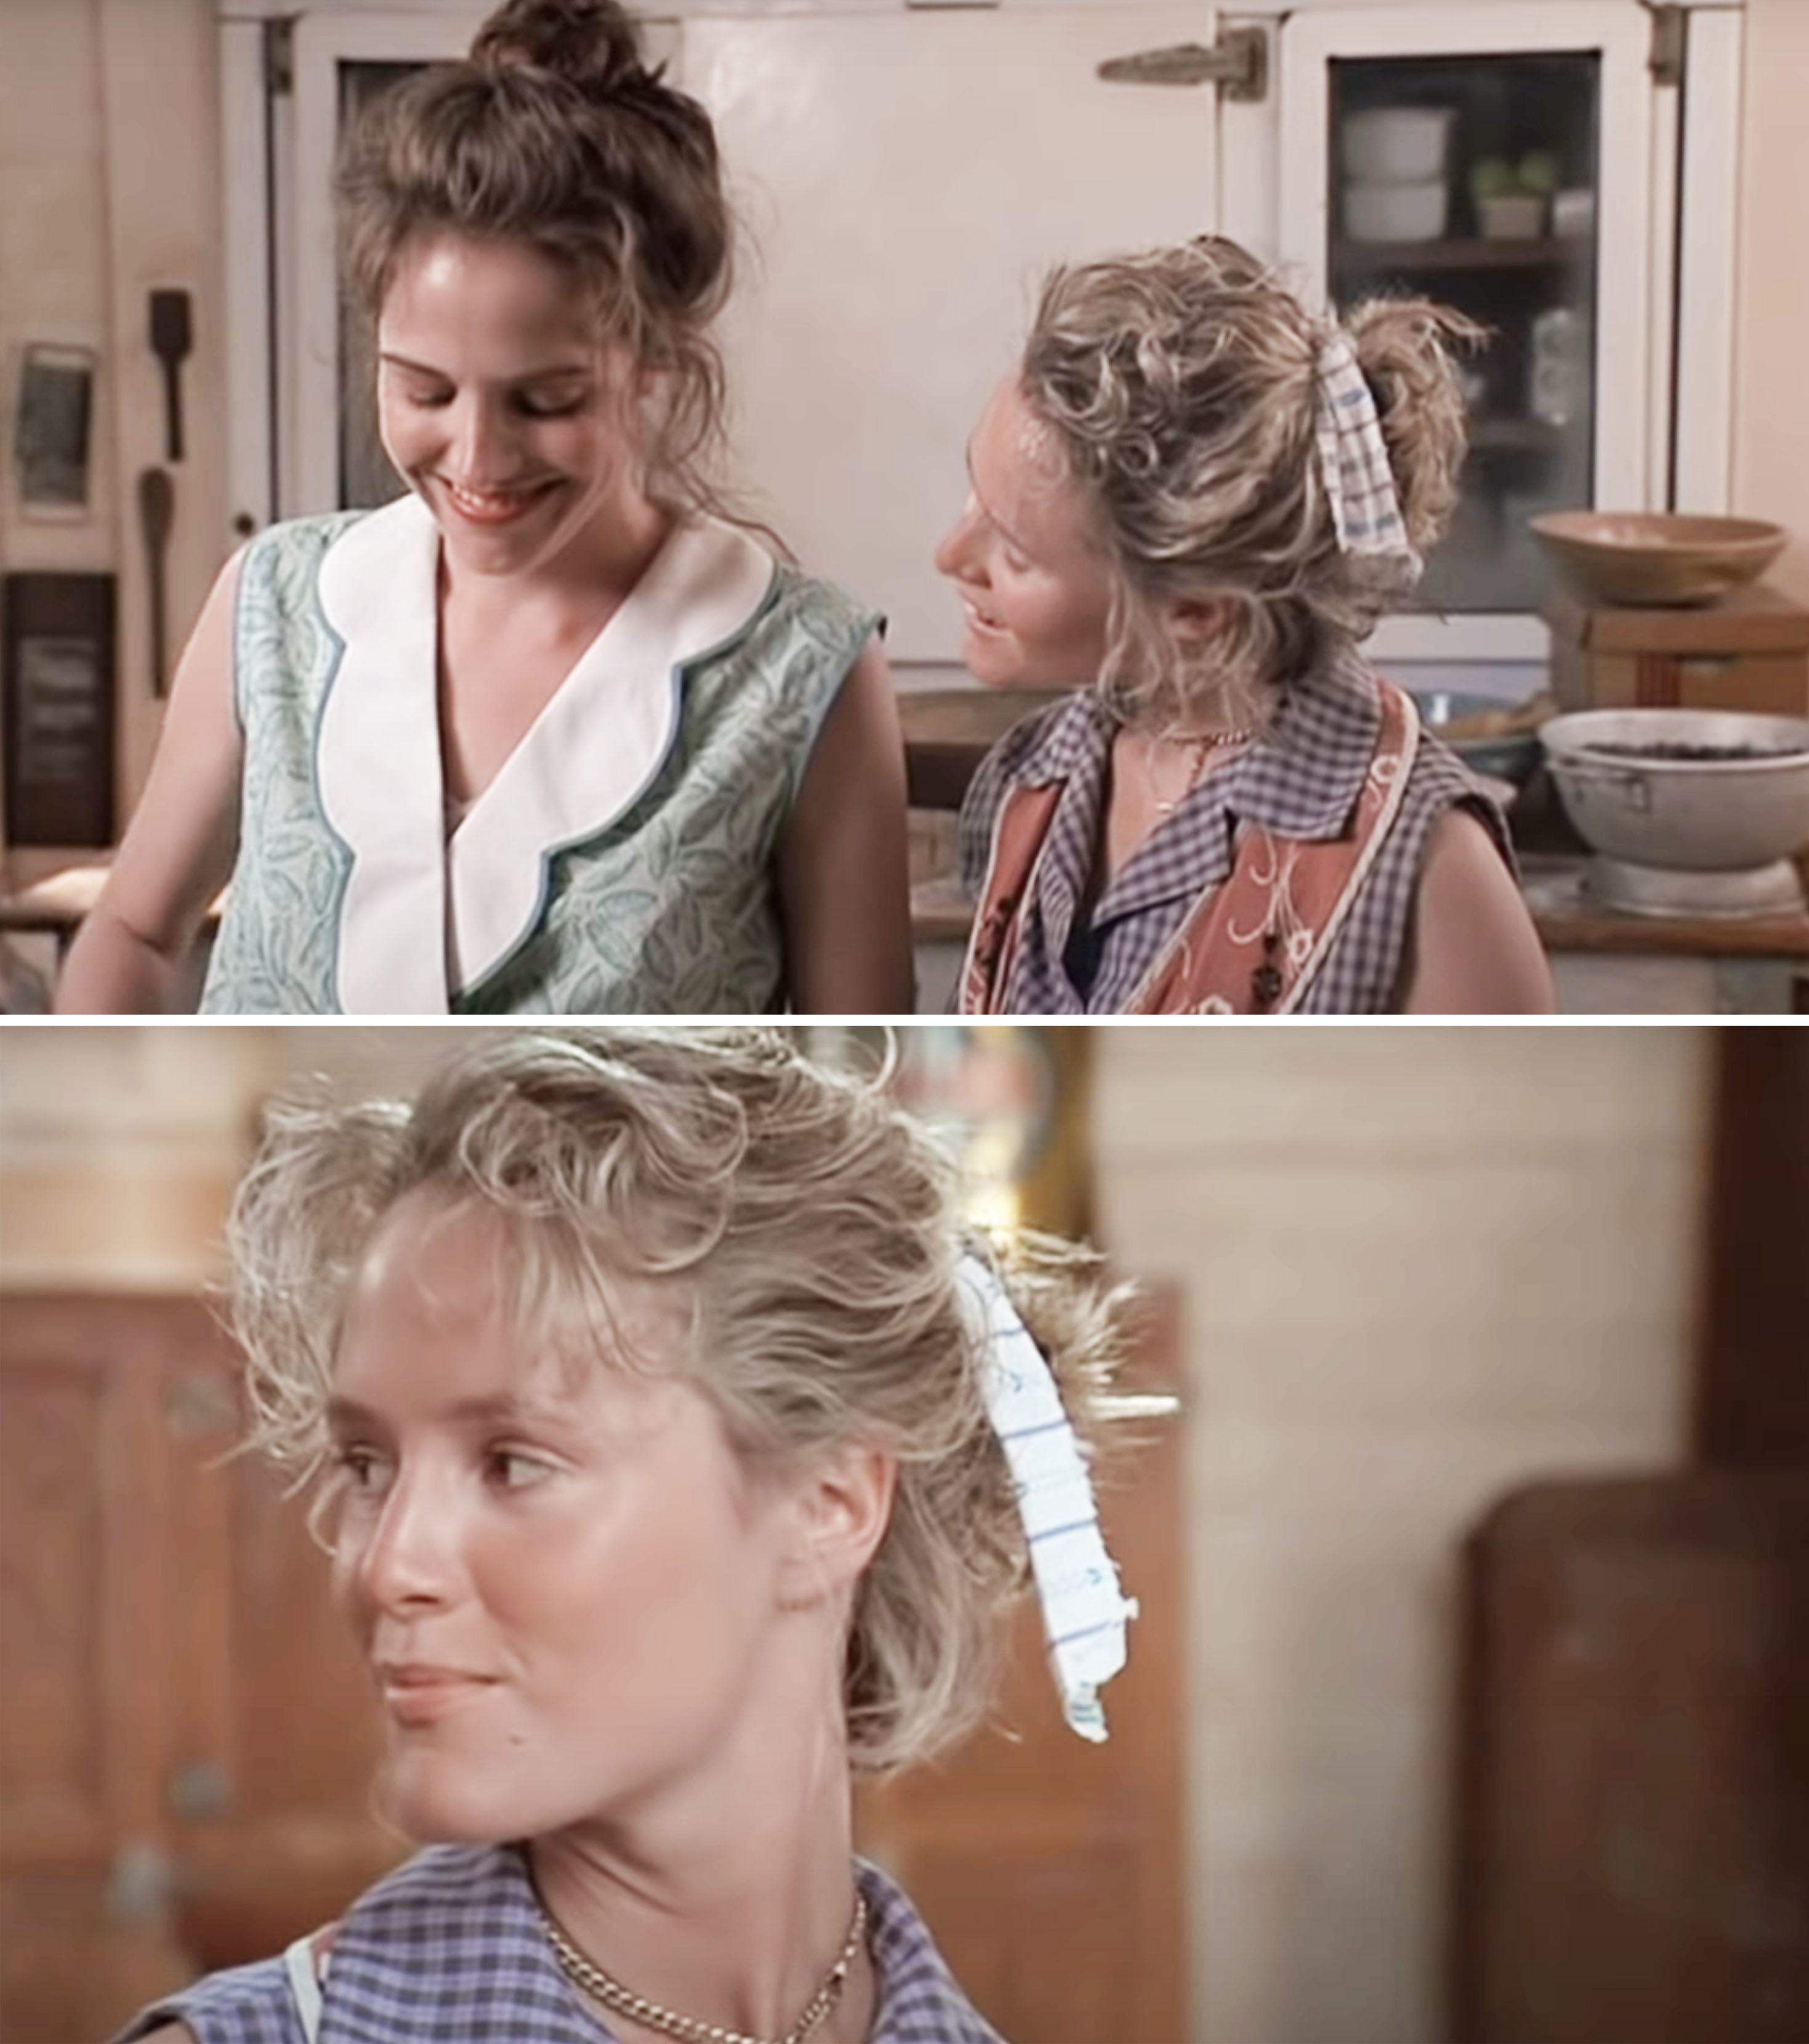 Screenshots from &quot;Fried Green Tomatoes&quot;